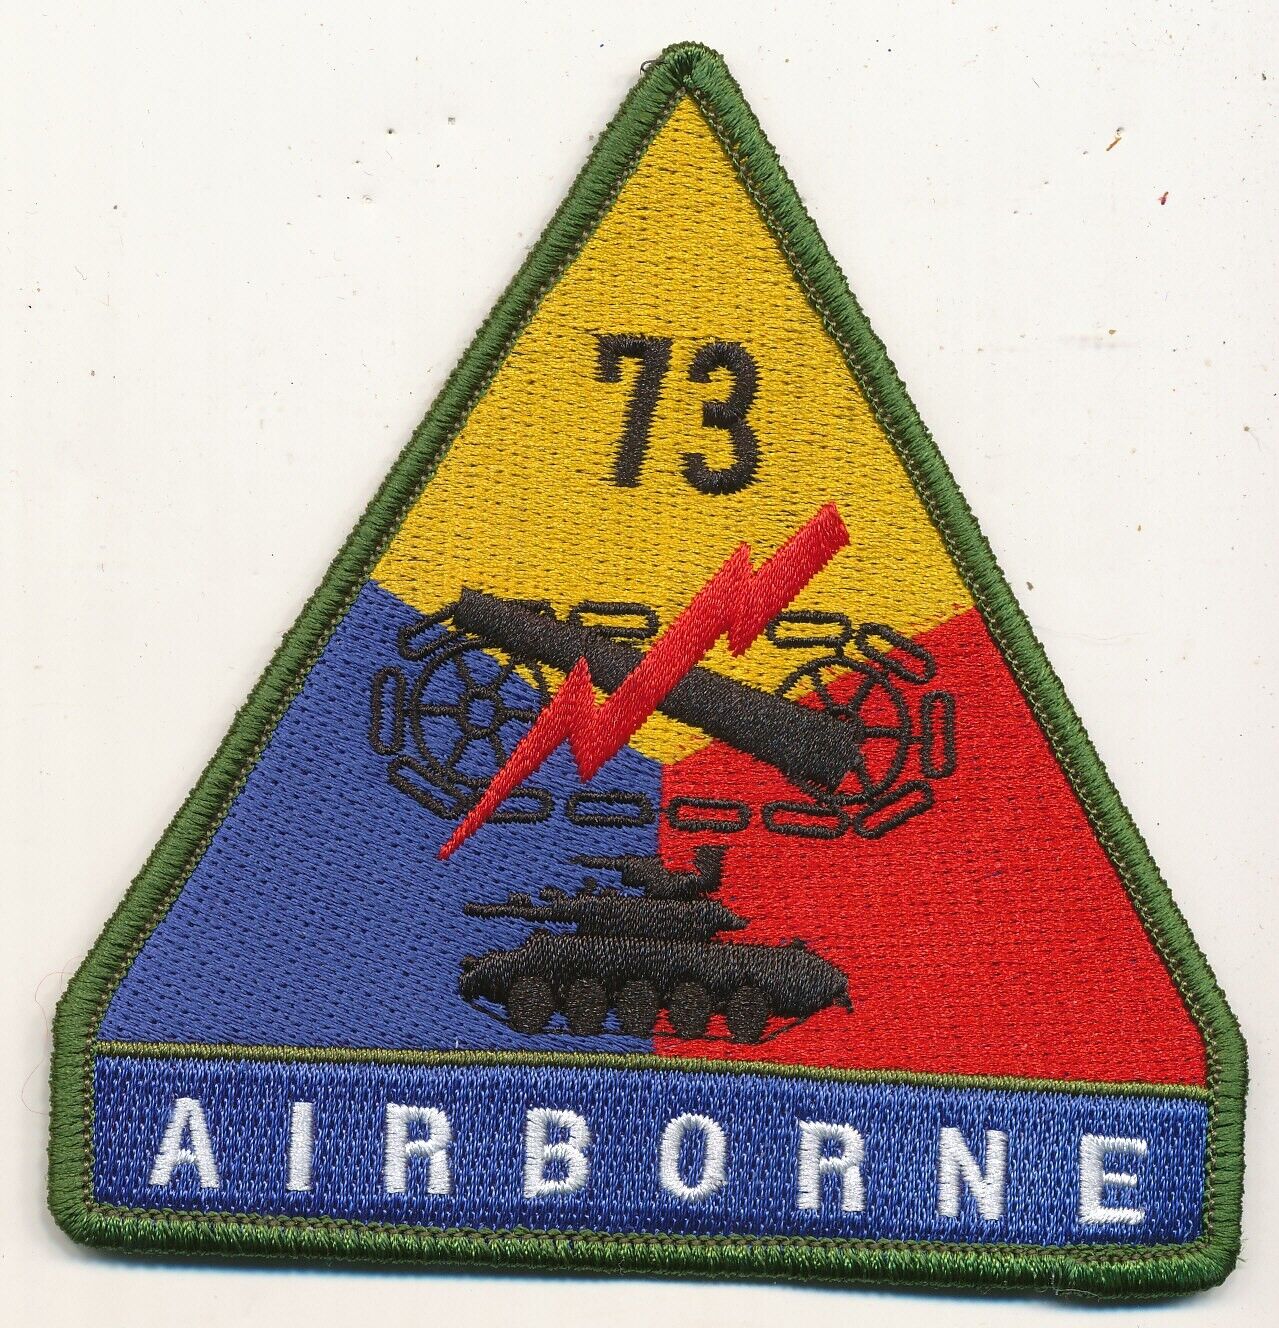 73rd Armor Regiment patch armored triangle Airborne with M551 Sheridan tank